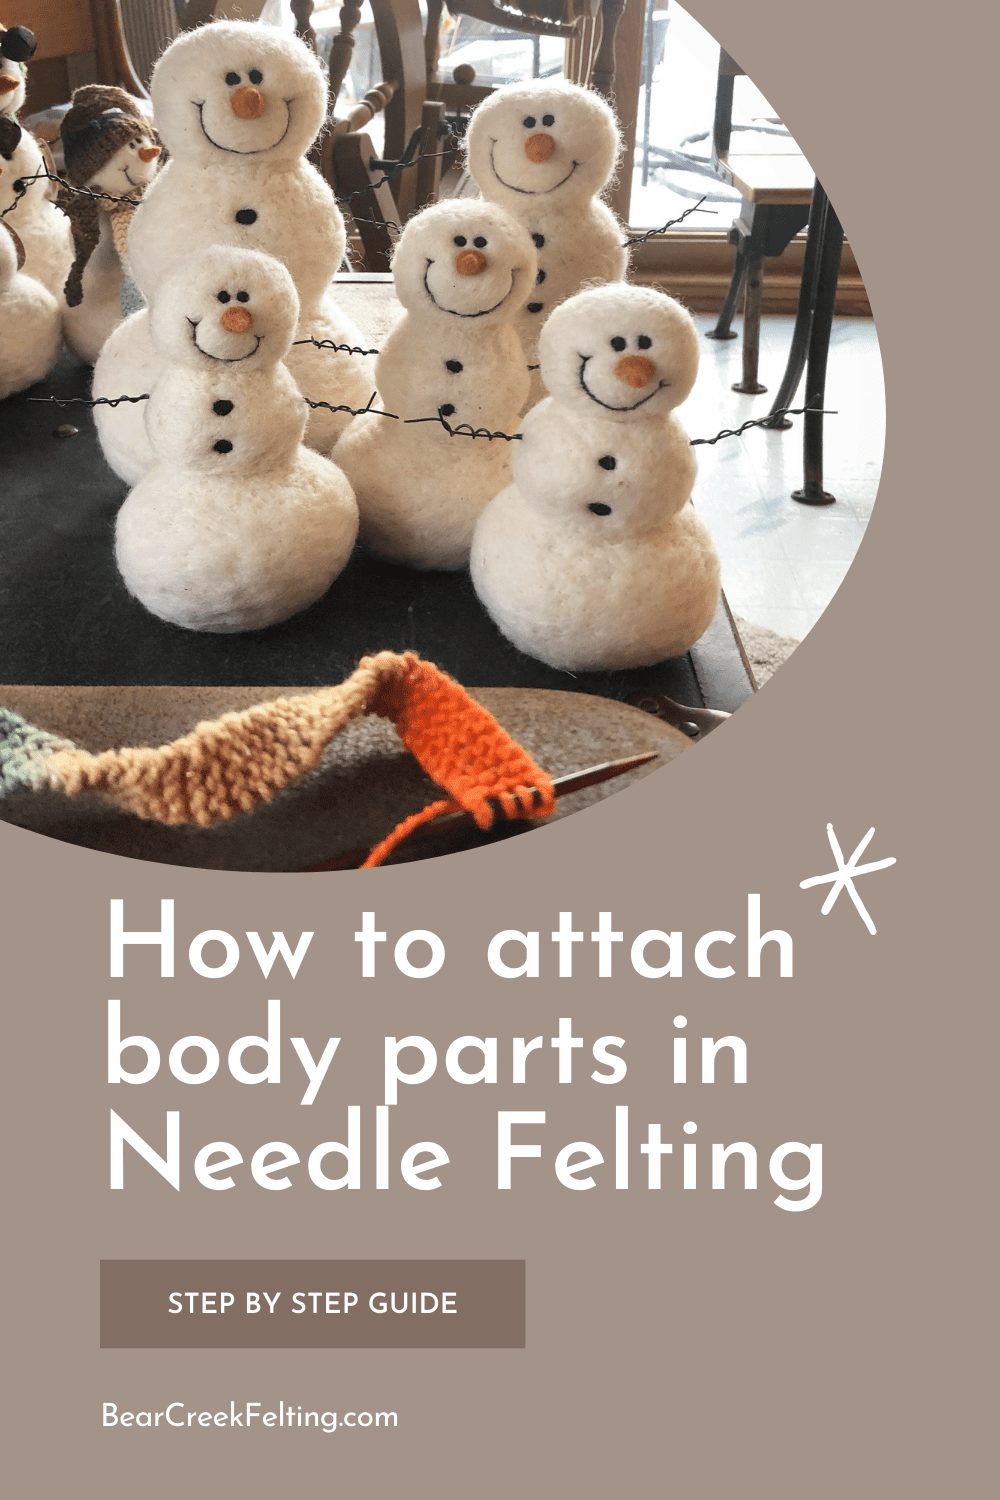 Guide to Needle Felting: How to Get Started